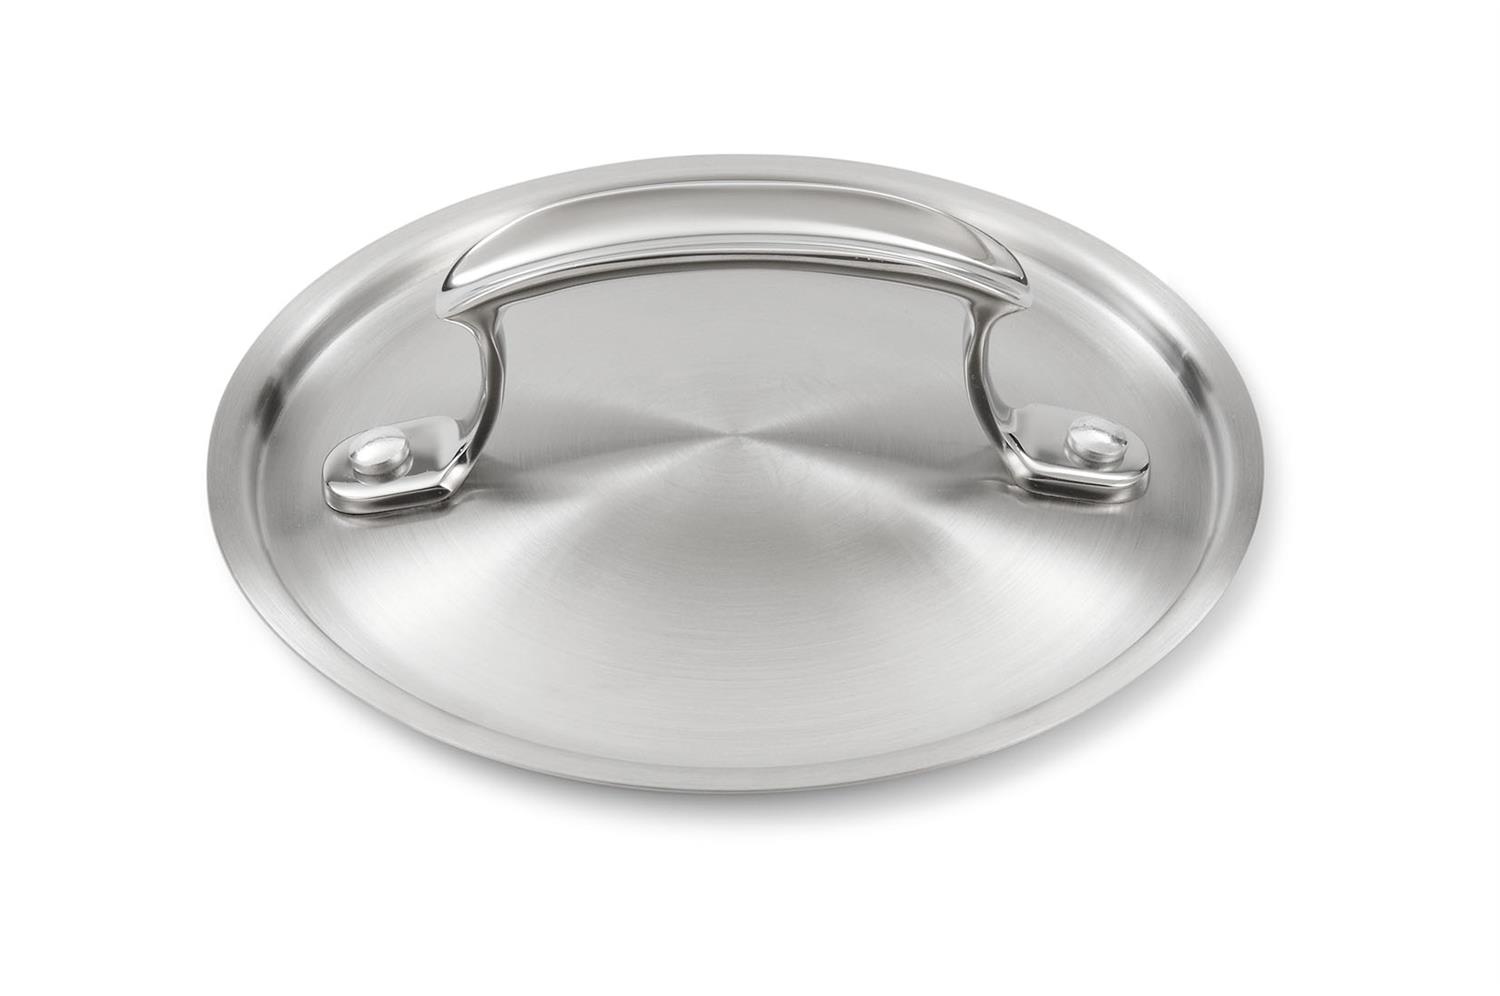 Vollrath 49427 Miramar Display Cookware, Low Dome Cover